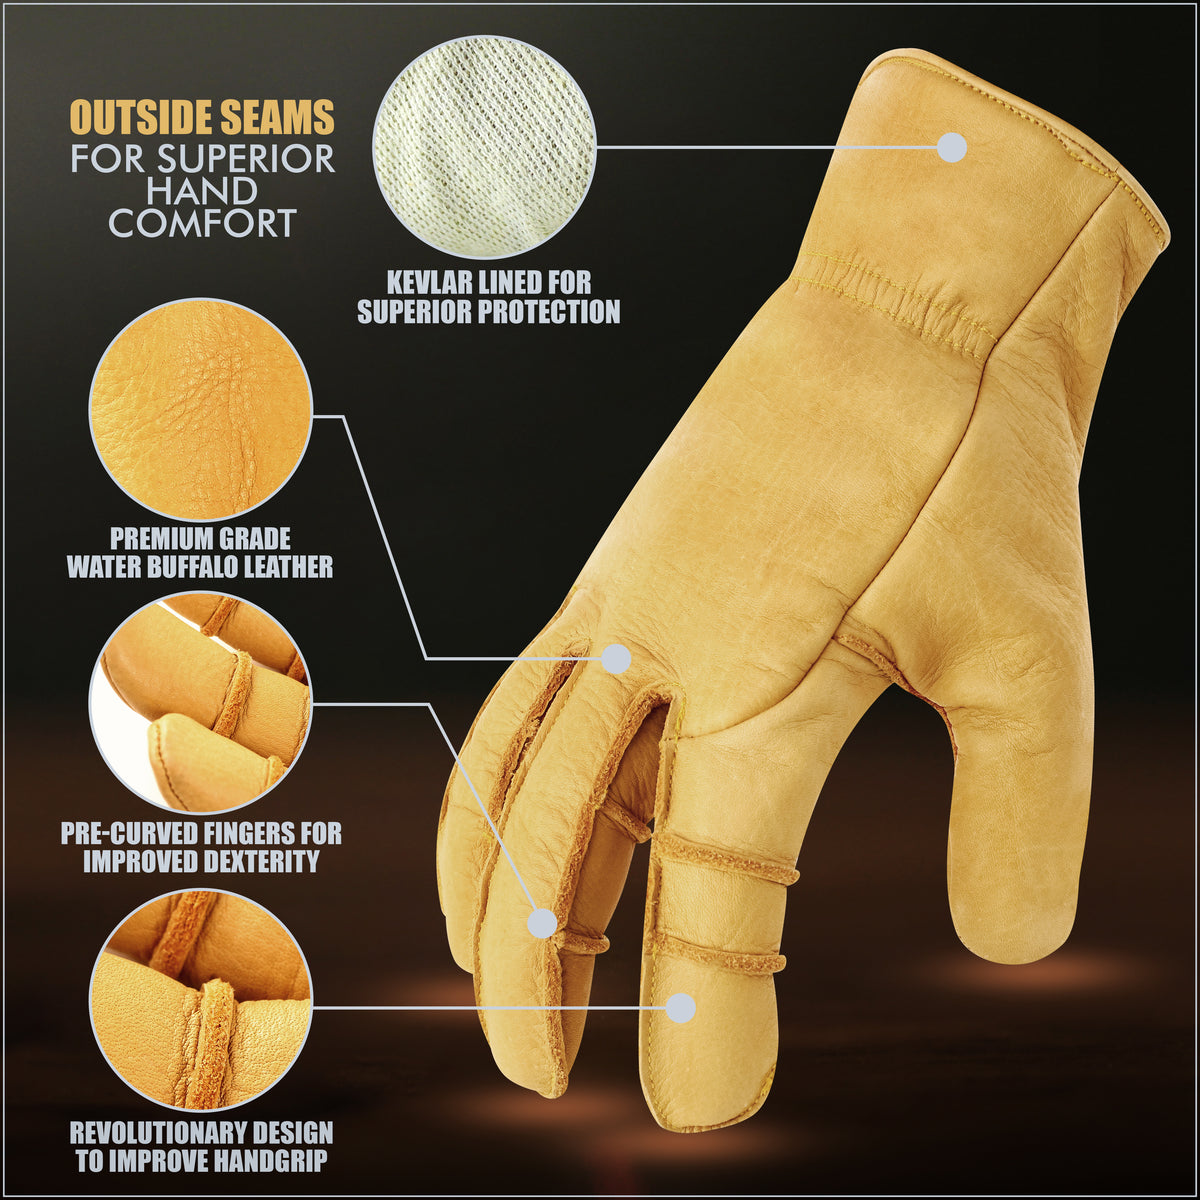 How To Choose Gloves For Construction Workers?